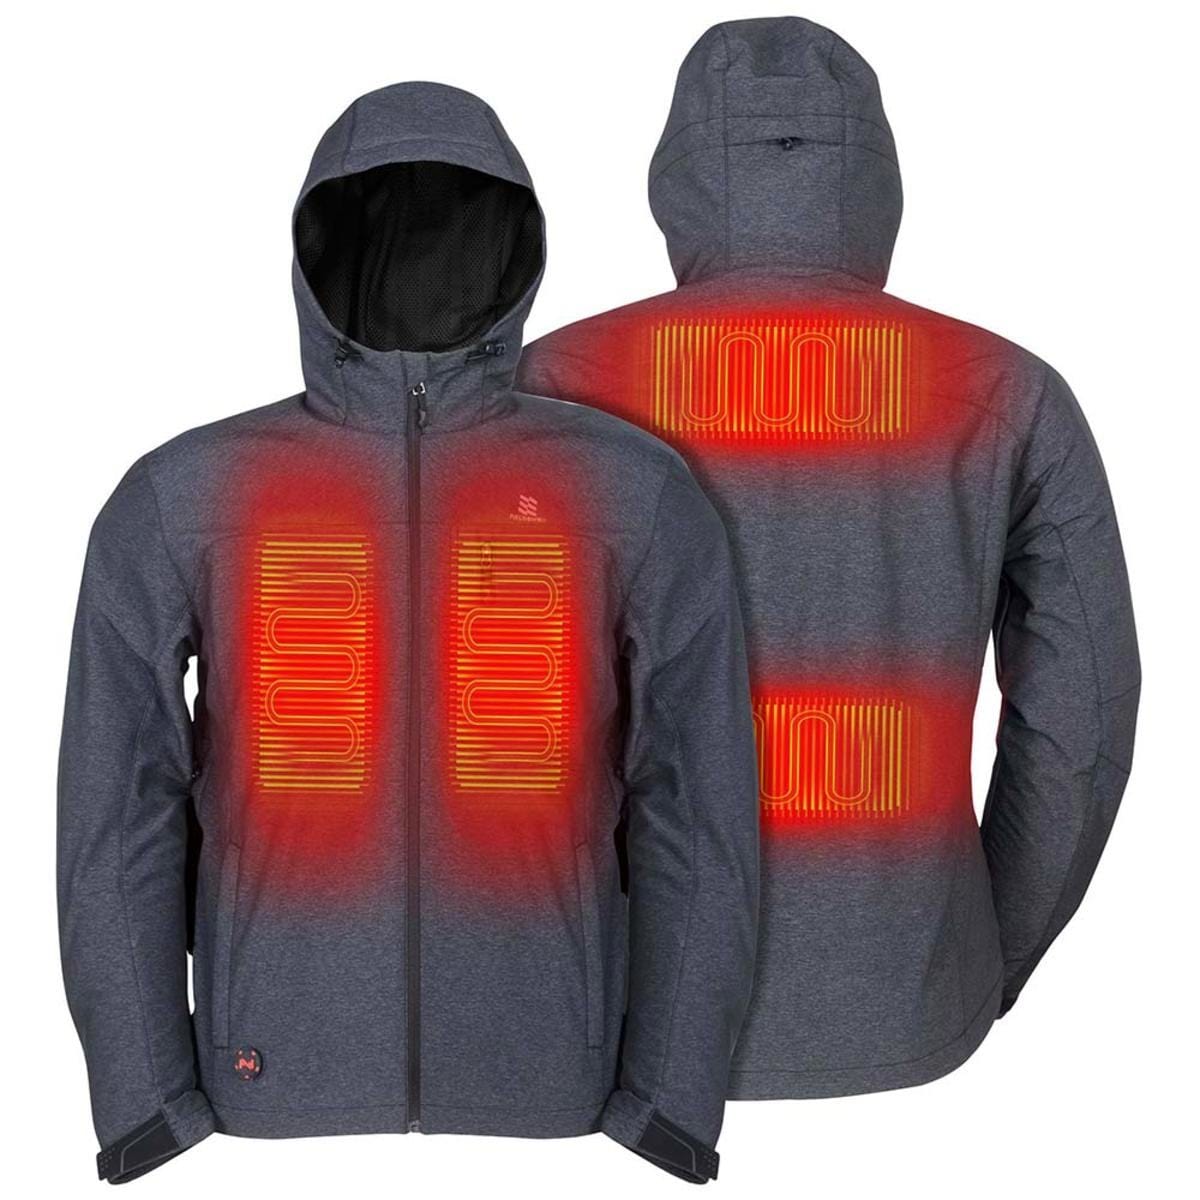 Adventure Heated Jacket - Mobile Warming™ heating technology - Backcountry 7.4-volt heating system 2200mAh - X-large